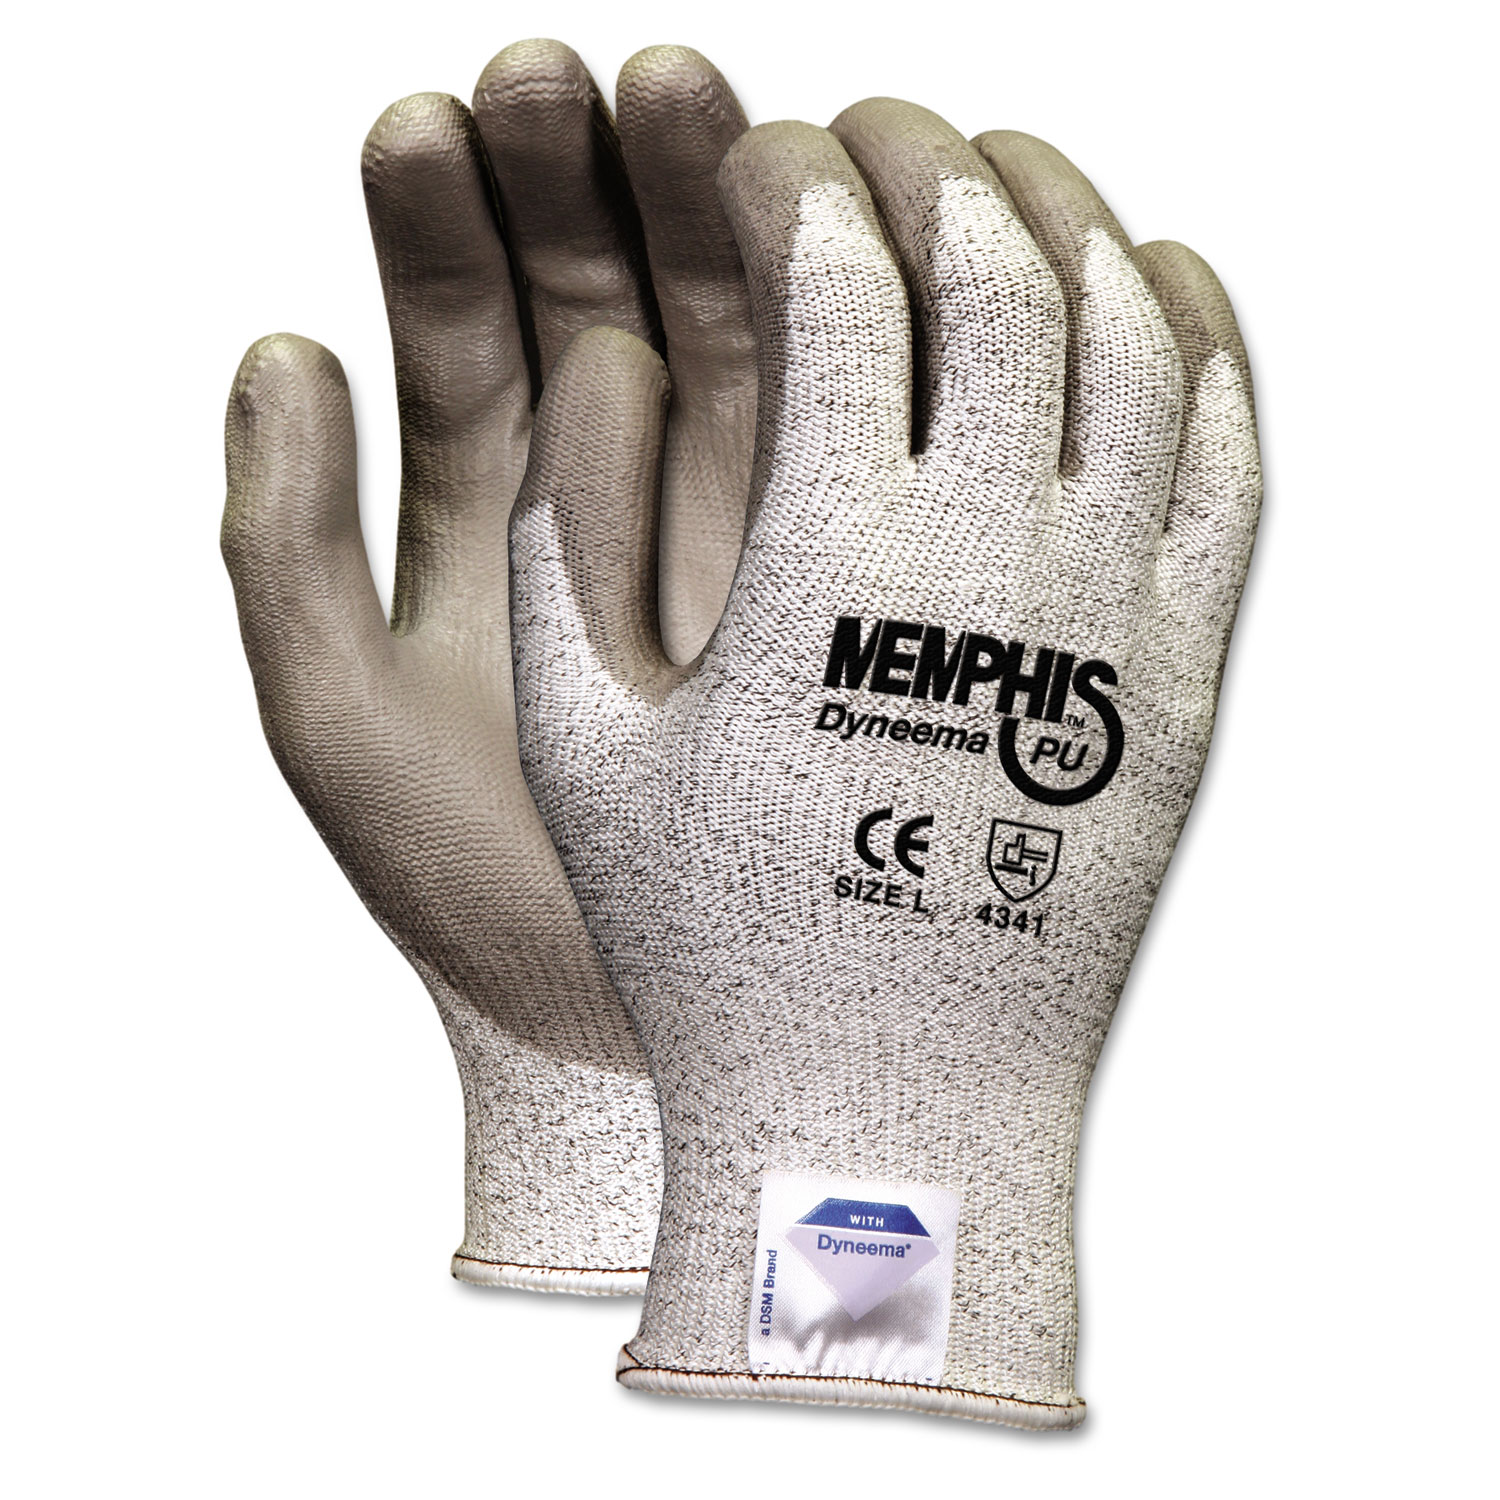 Memphis, MCSCRW9672XL, Dyneema Dipped Safety Gloves, 2 / Pair, Gray - image 1 of 2